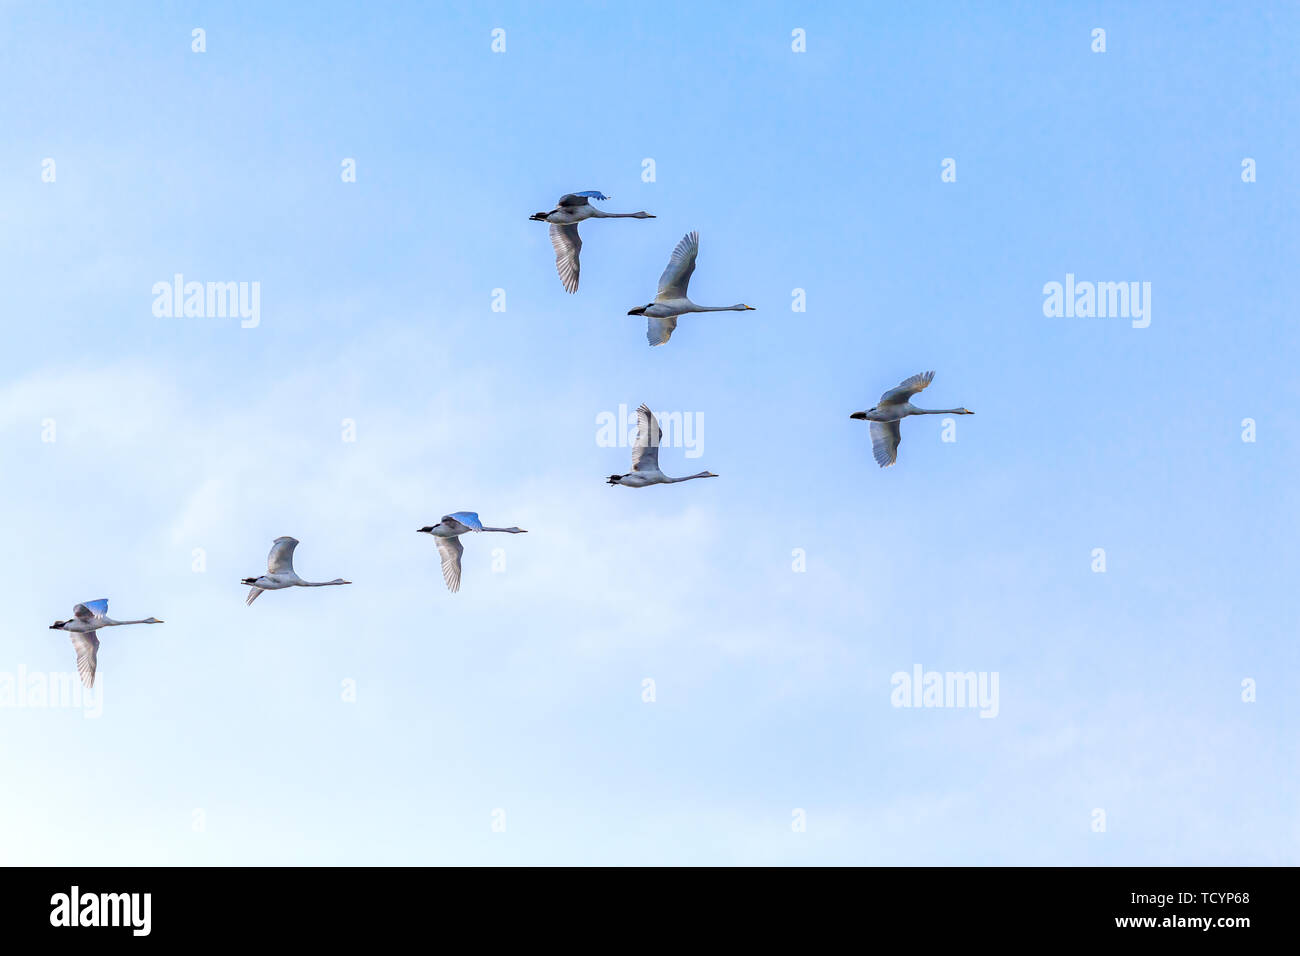 Swan flying in a blue sky Stock Photo